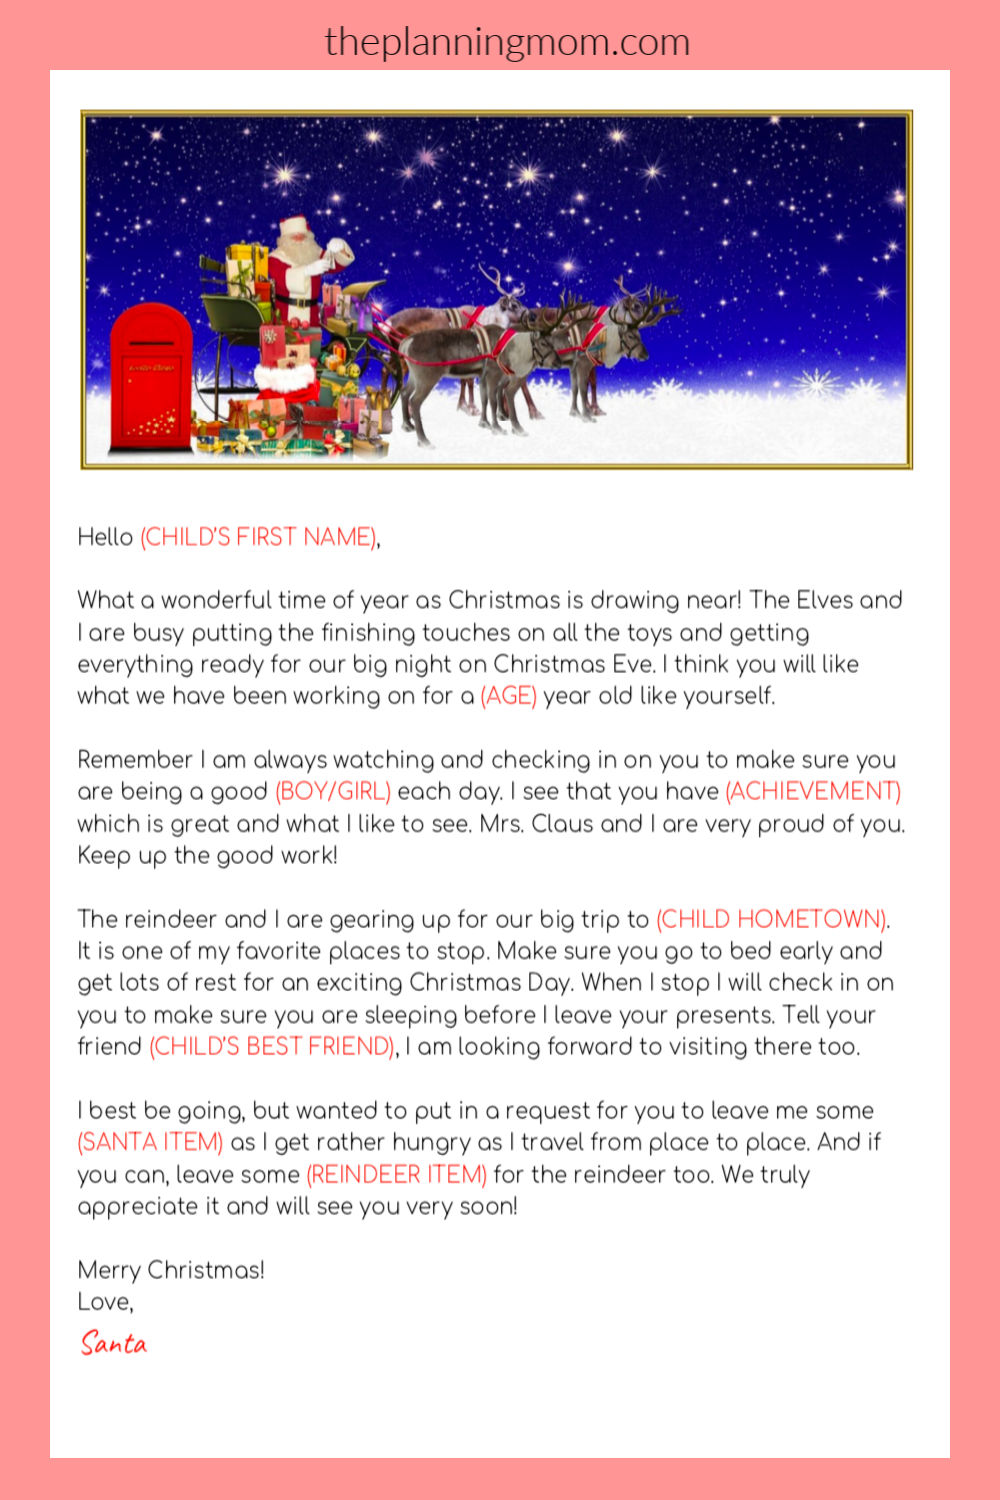 how-to-get-a-letter-from-santa-in-the-mail-the-planning-mom